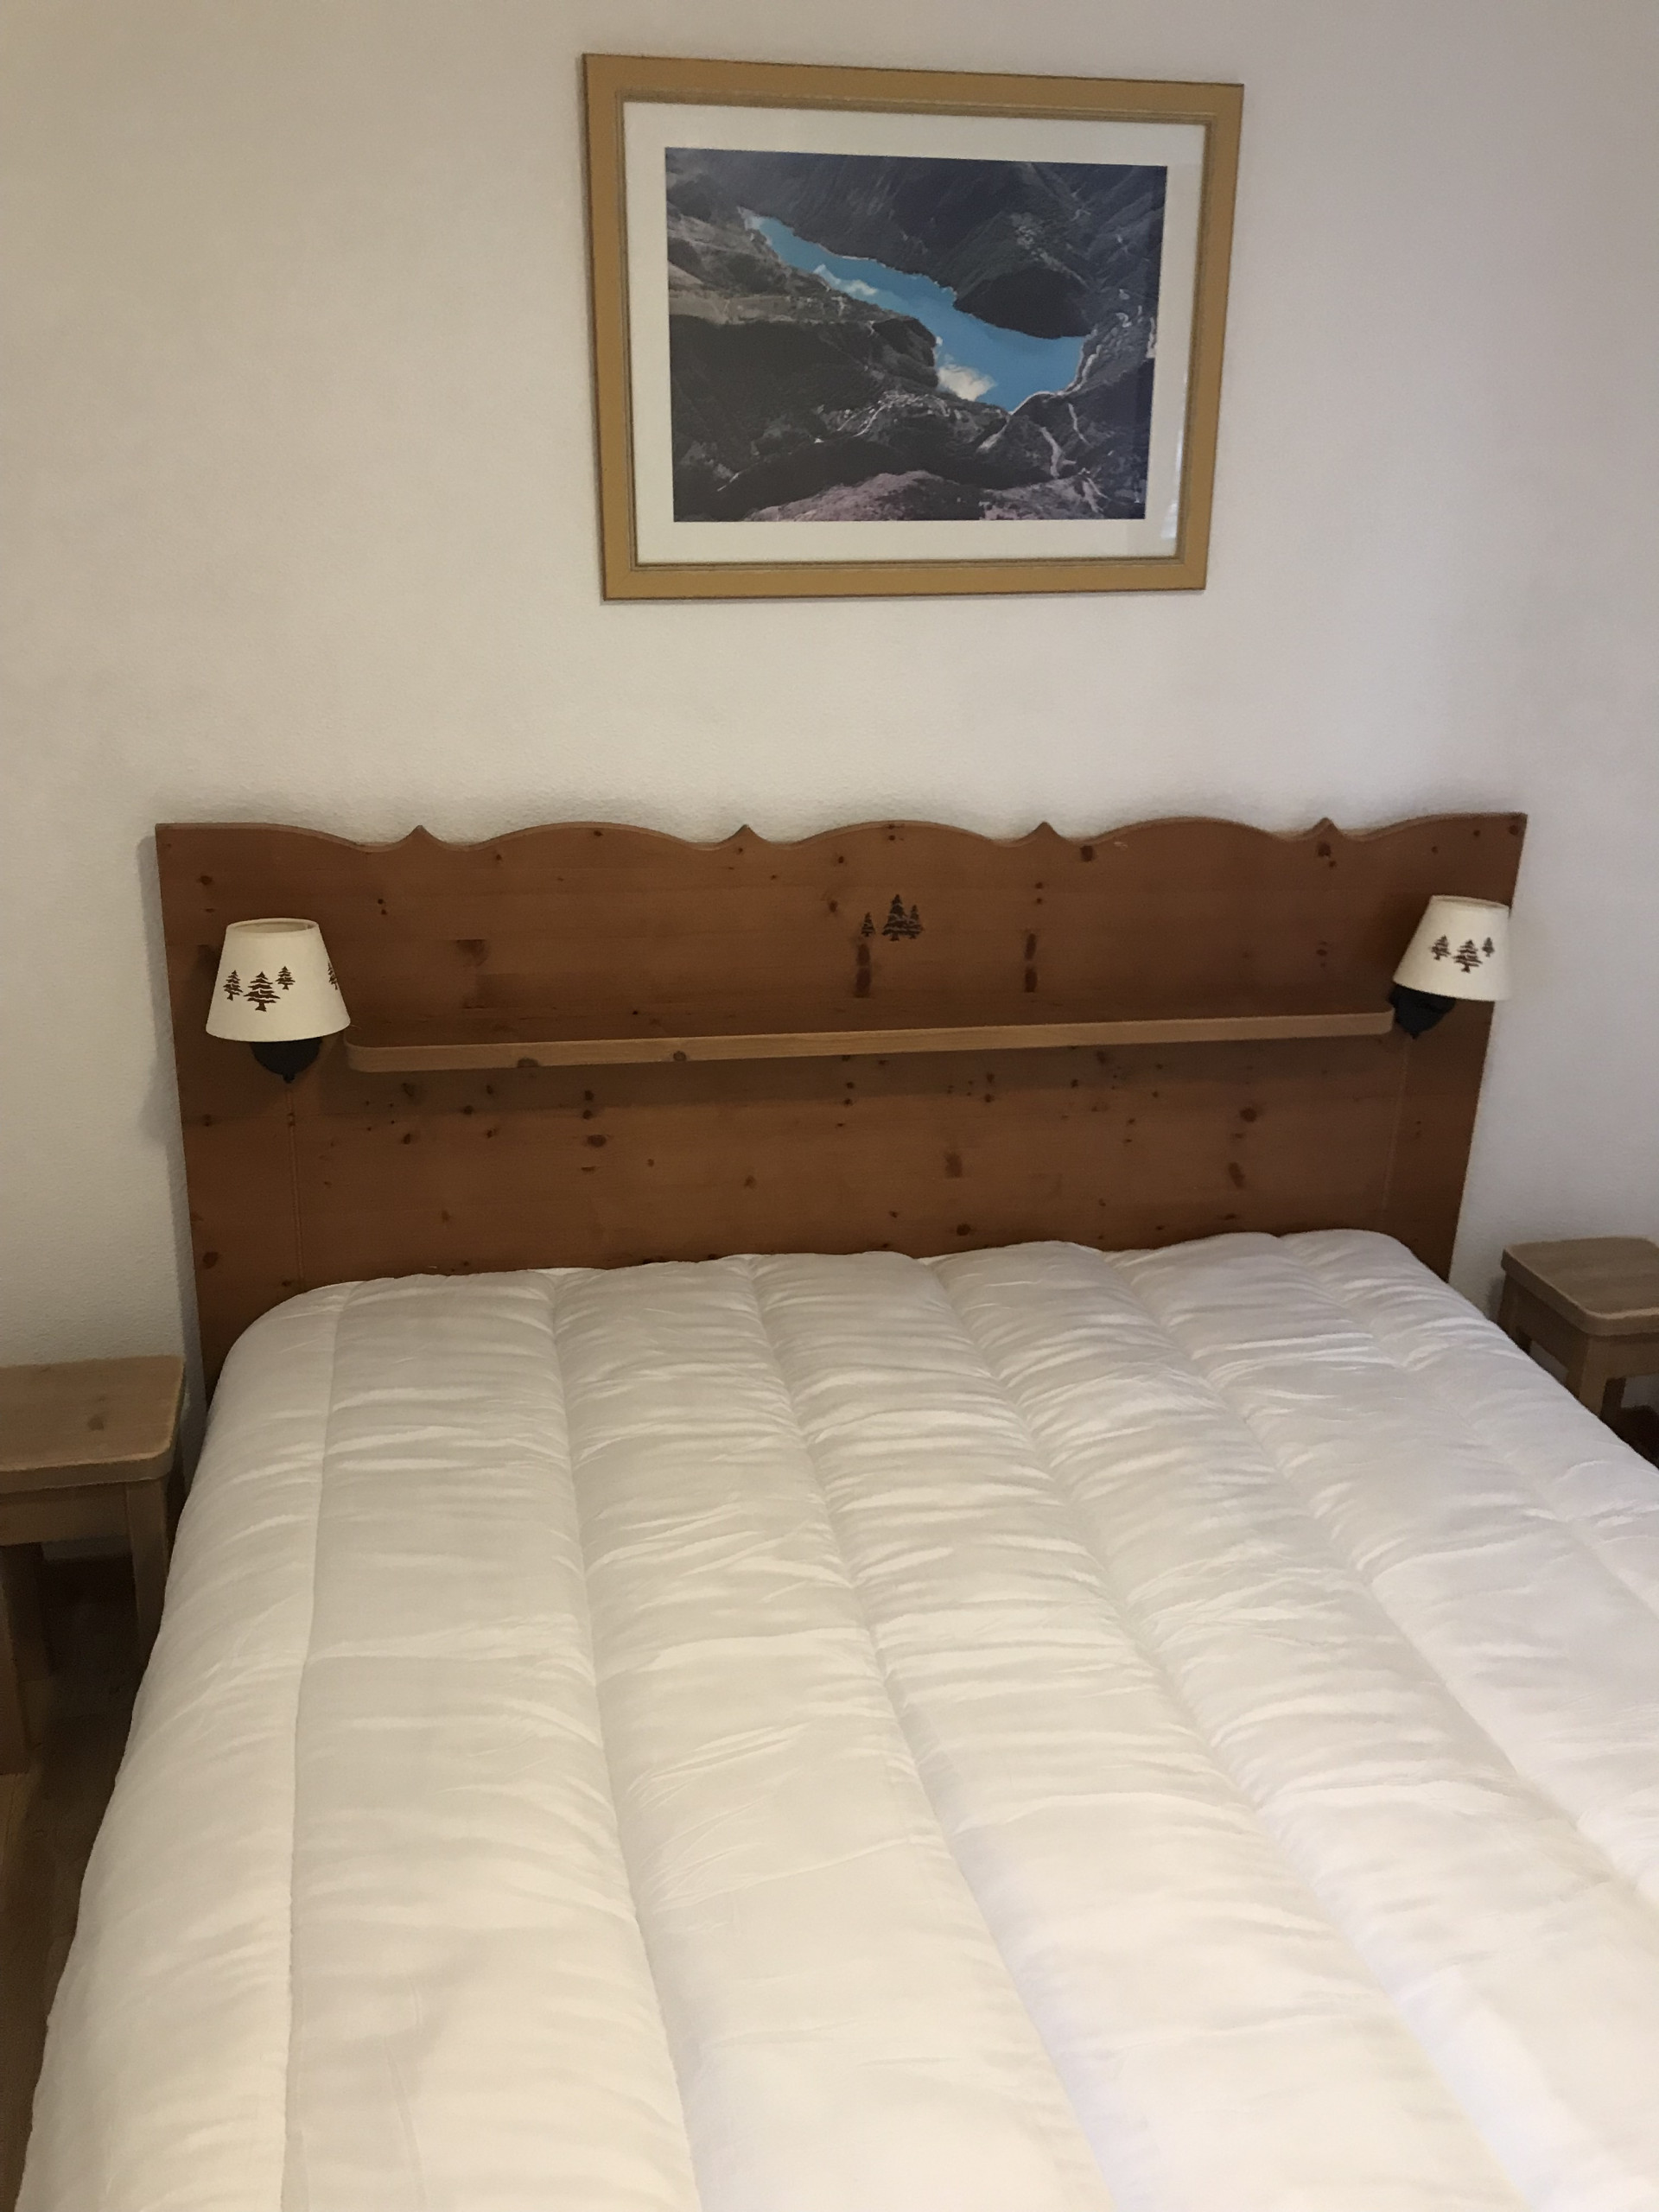 Appartement V du Bachat Asters B21 - Appt 4/6 pers - Chamrousse